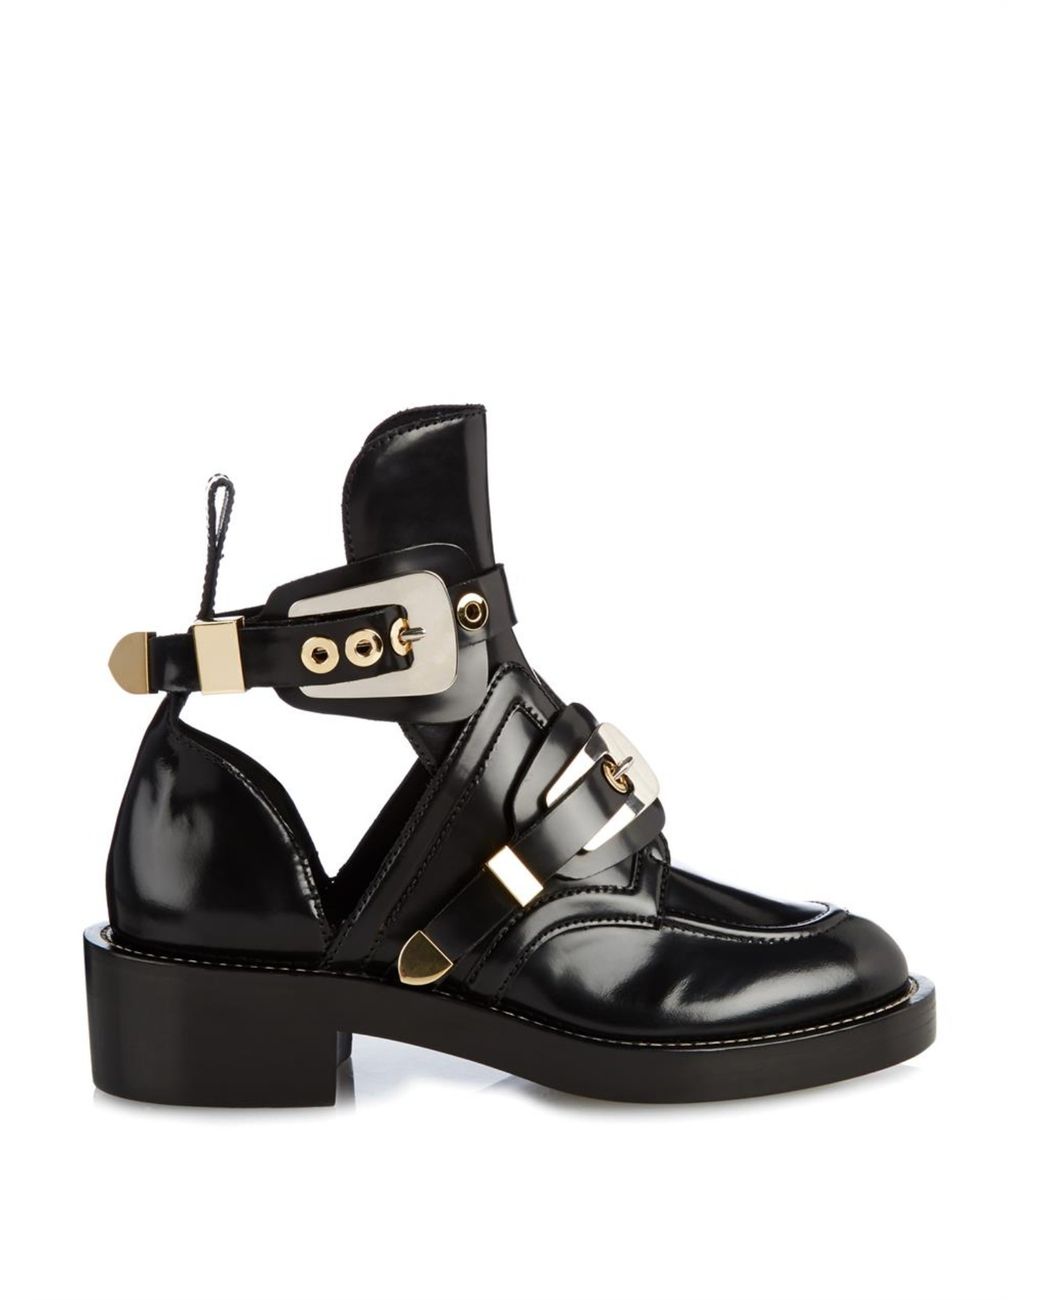 udledning Frugtbar bh The Look For Less: Balenciaga Ceinture Ankle Boot $1,275 $100 THE BALLER ON  A BUDGET An Affordable Fashion, Beauty Lifestyle Blog |  xn--90absbknhbvge.xn--p1ai:443